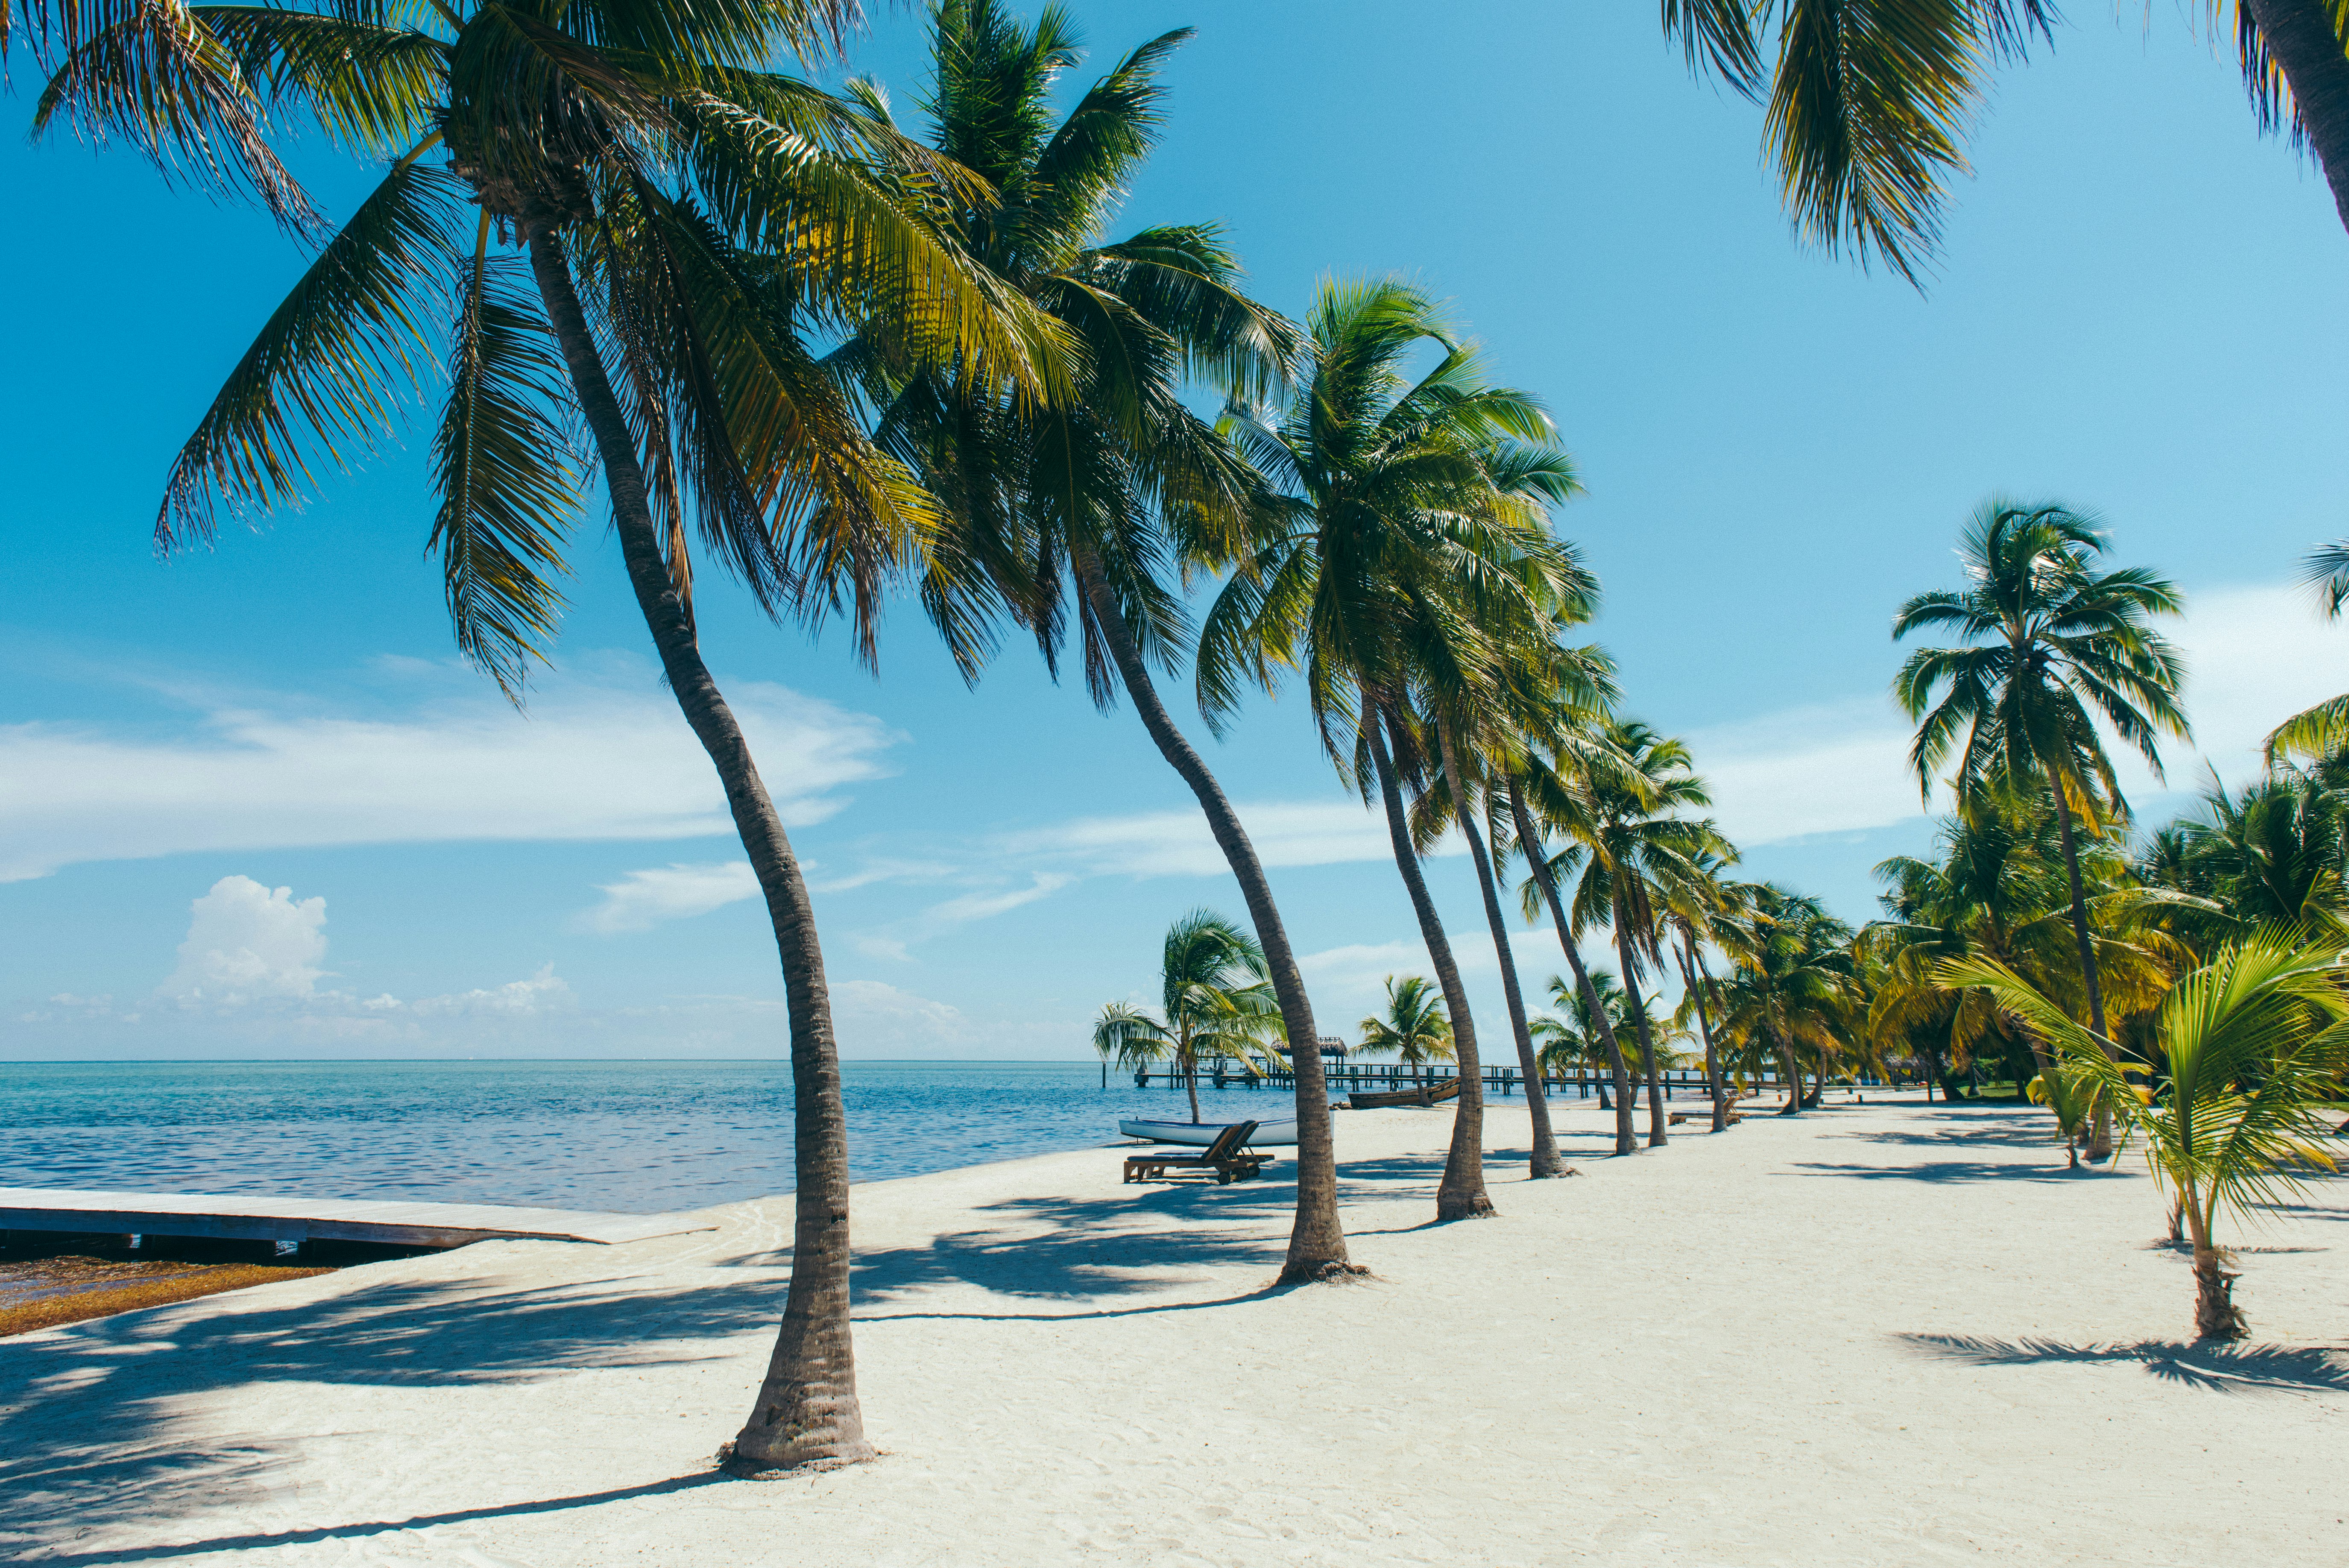 A row of palm trees on a fine, white-sand beach near turquoise water with small ripples -- a placid beach-side scene in Islamorada, Florida